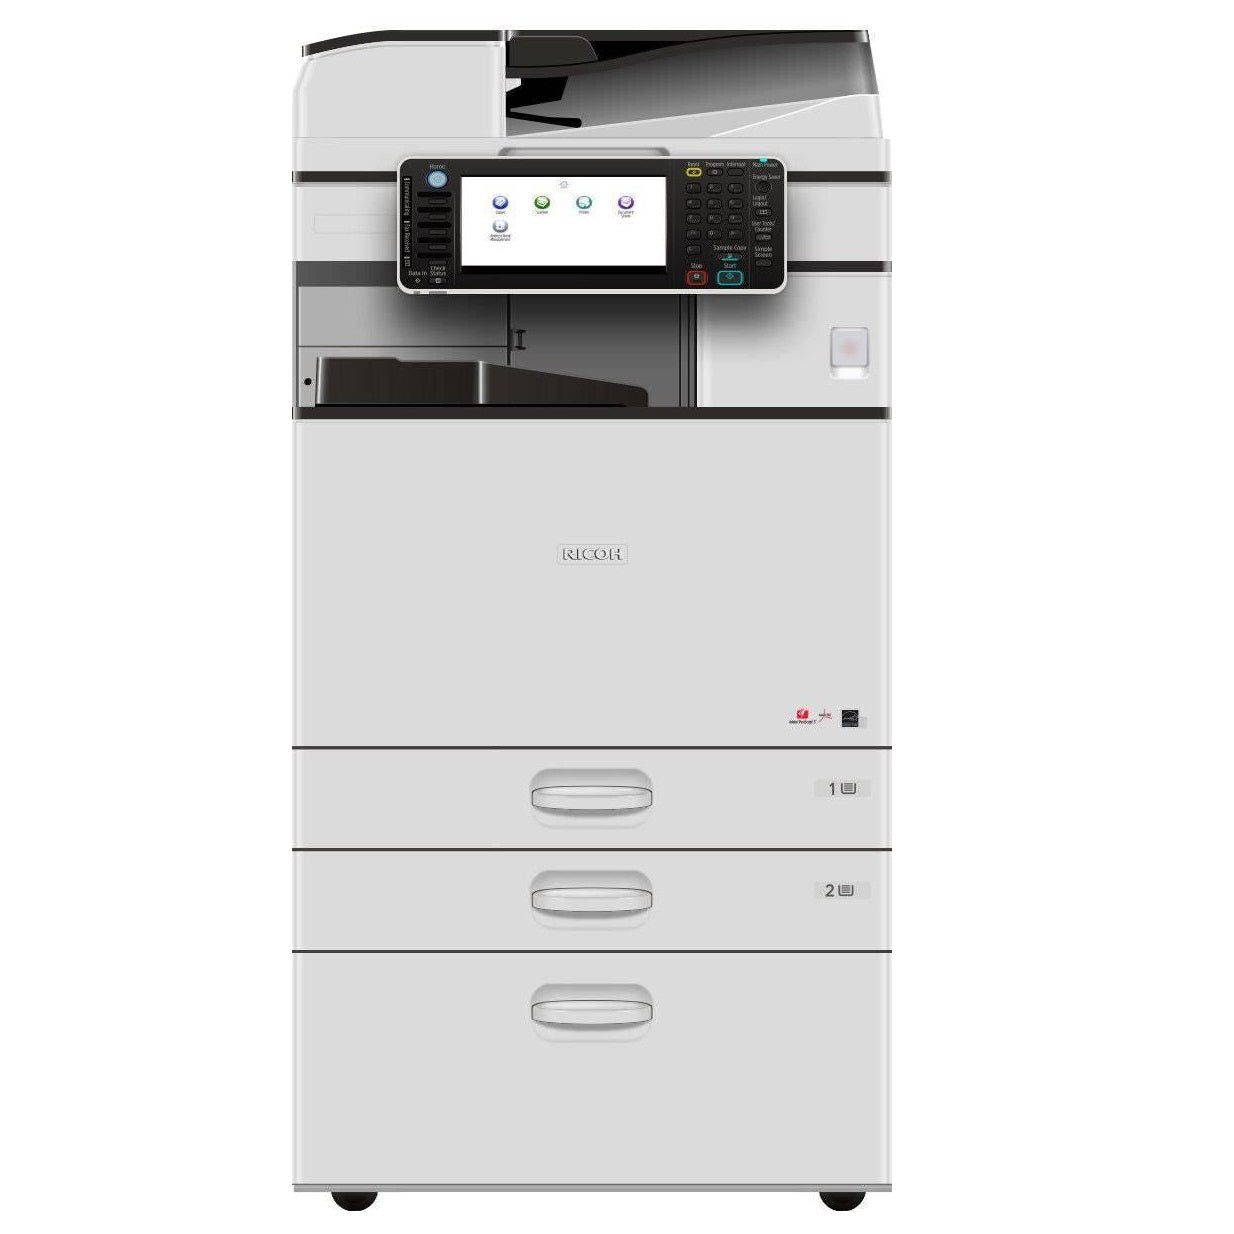 Absolute Toner $1350 DEAL - Ricoh MP 3054 Monochrome Multifunction Printer Copier Color Scanner, 11x17 For Office Use Showroom Monochrome Copiers